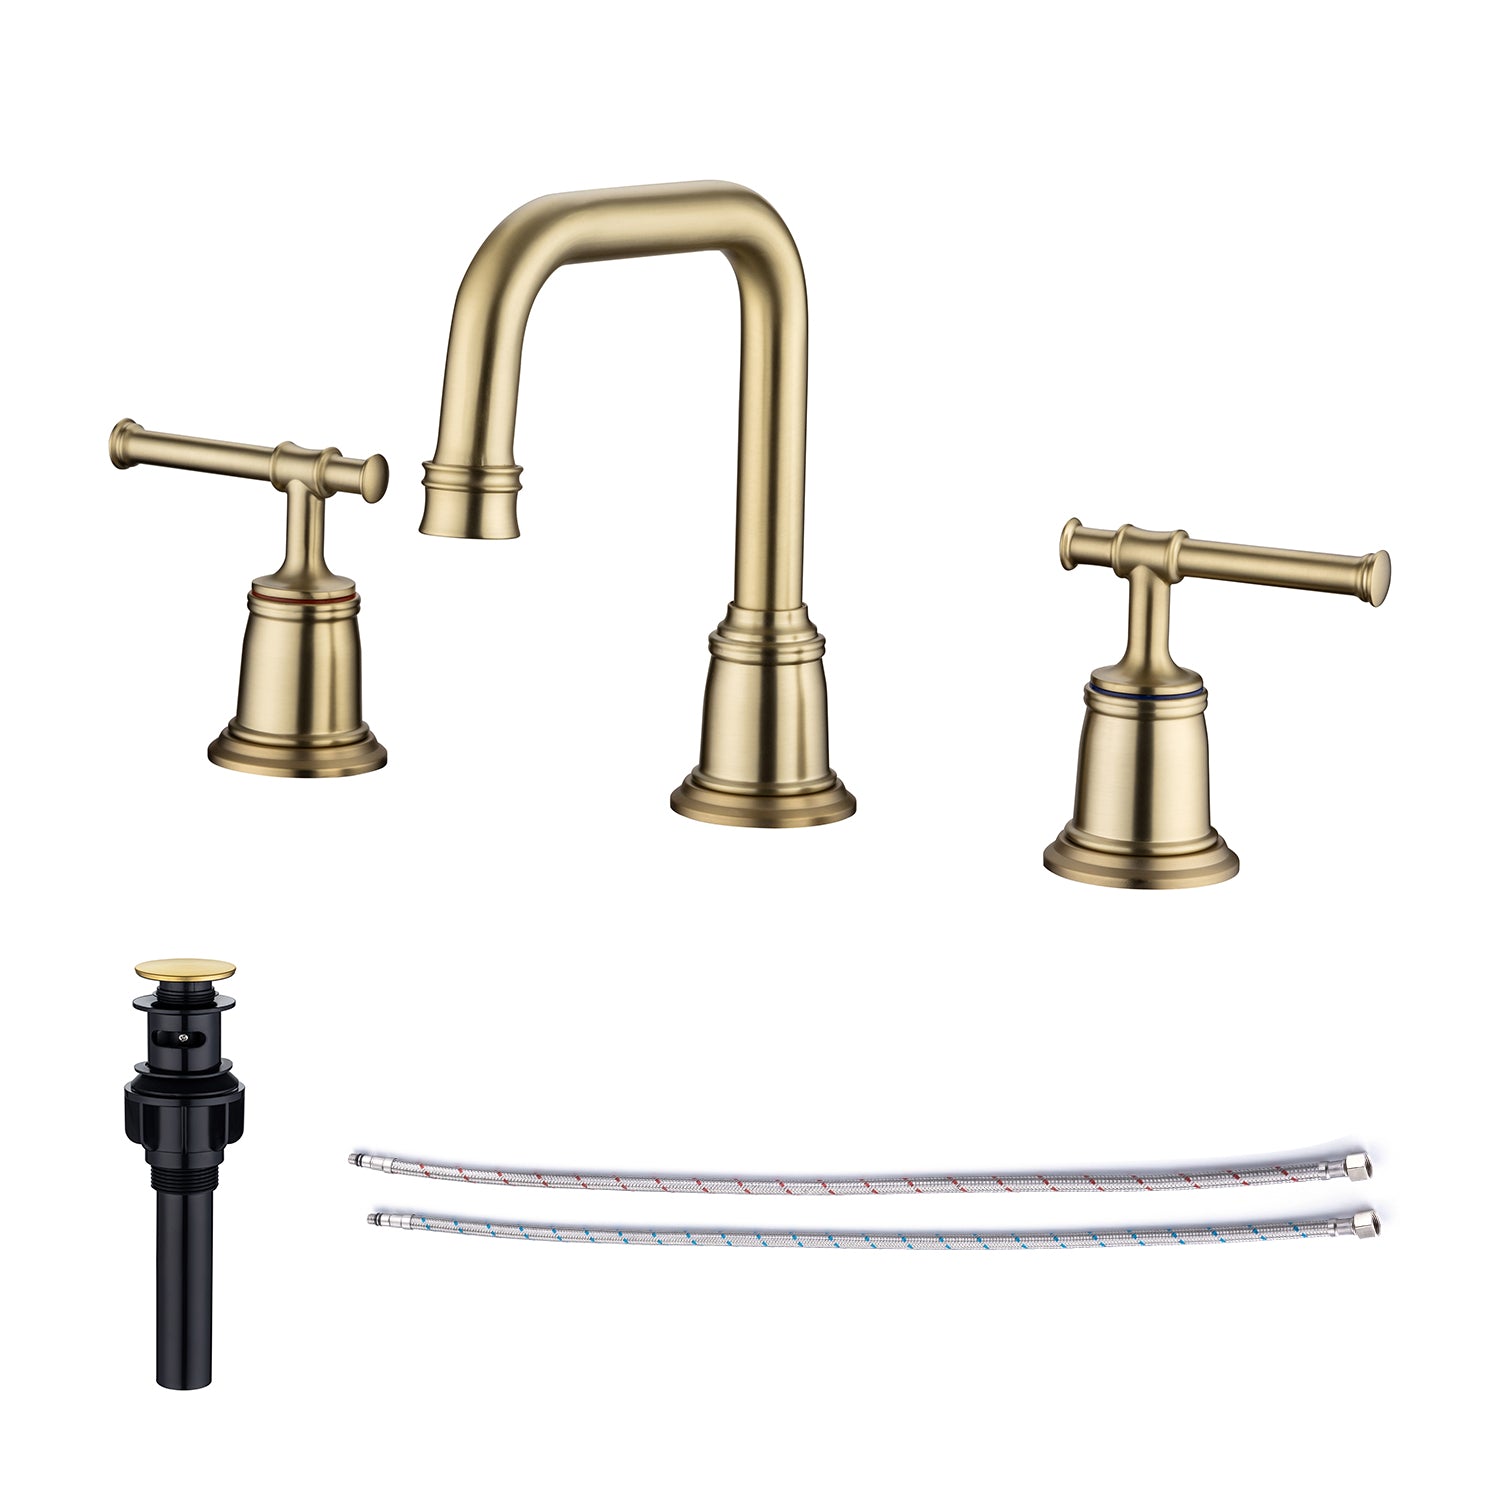 [Rainlex RX83008]Widespread Faucet 2-handle Bathroom Faucet with Drain Assembly